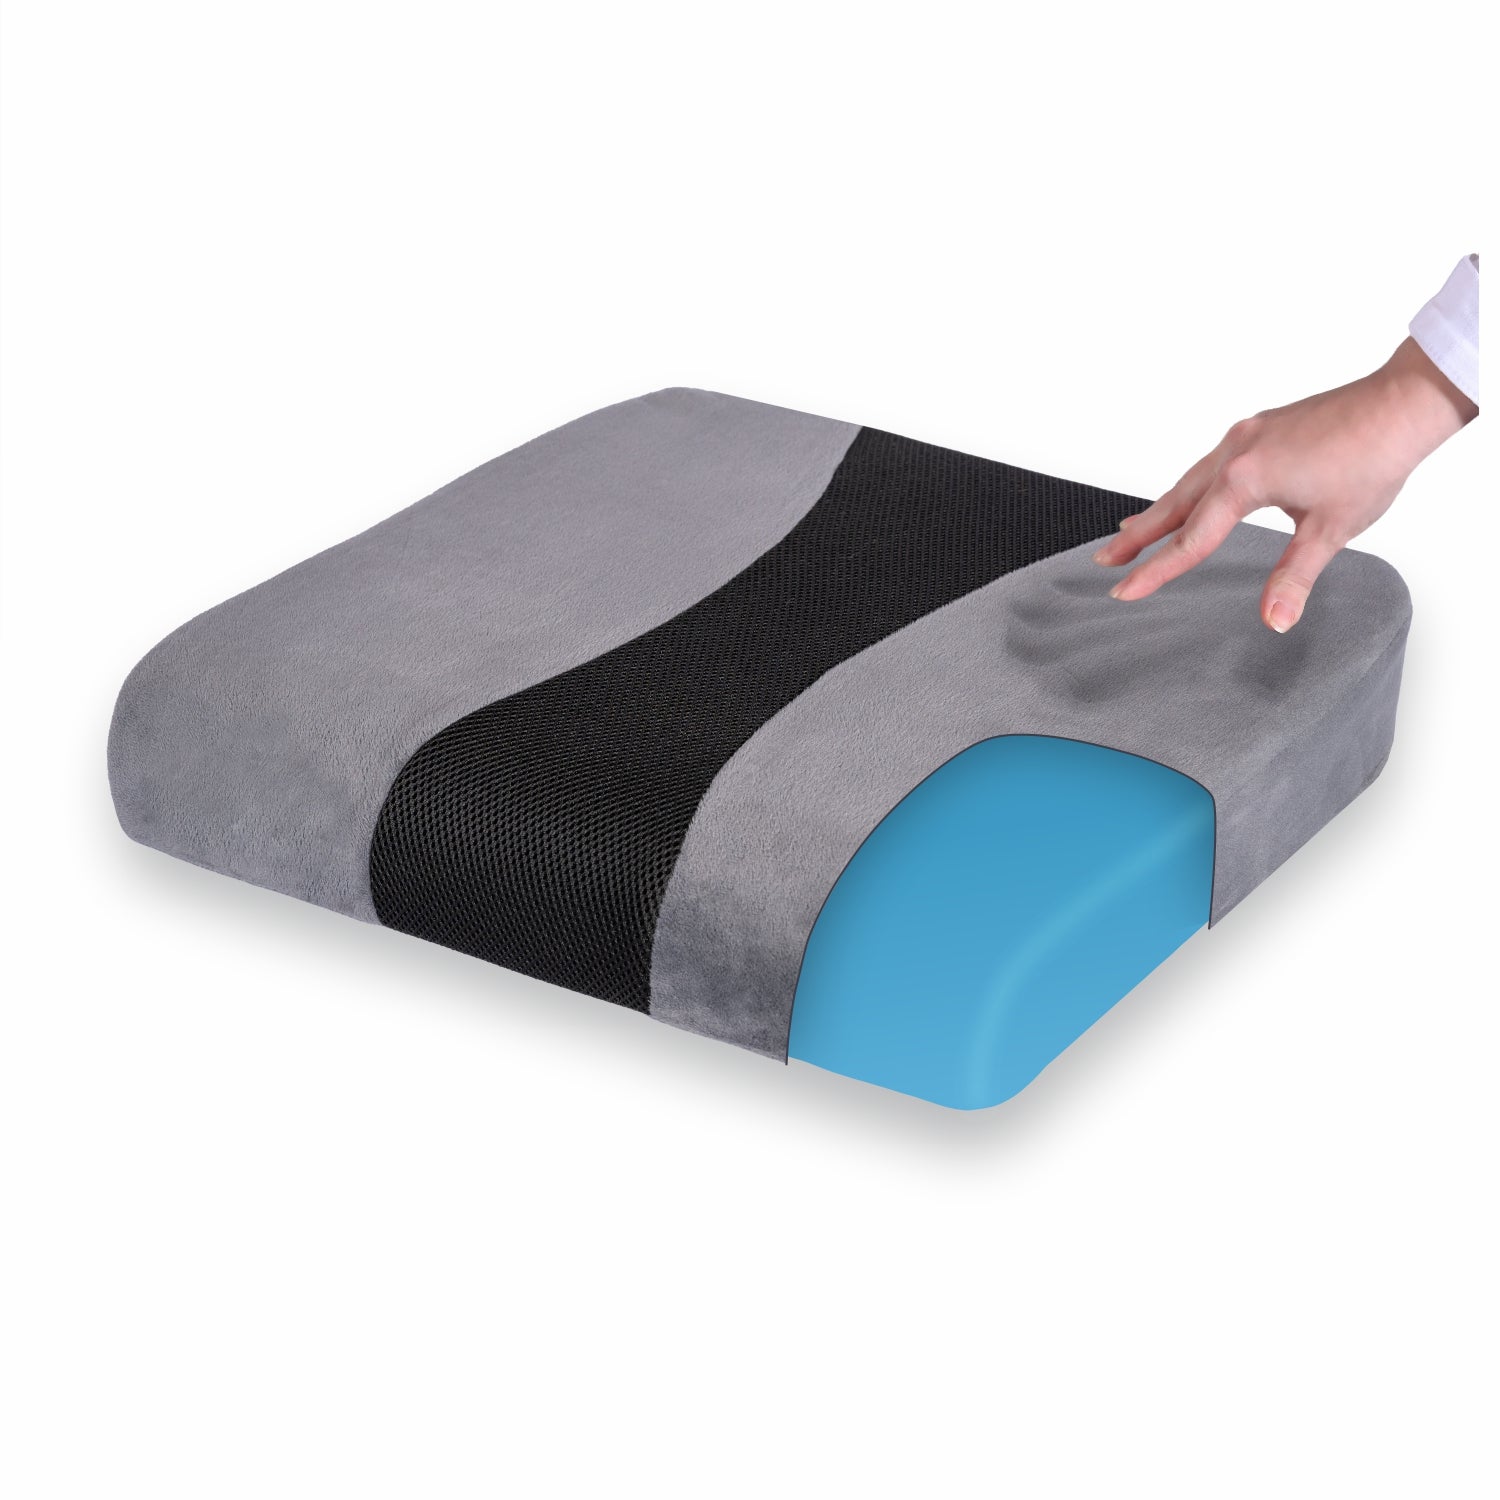 Extra-Thick Therapeutic Memory Foam Seat Cushion